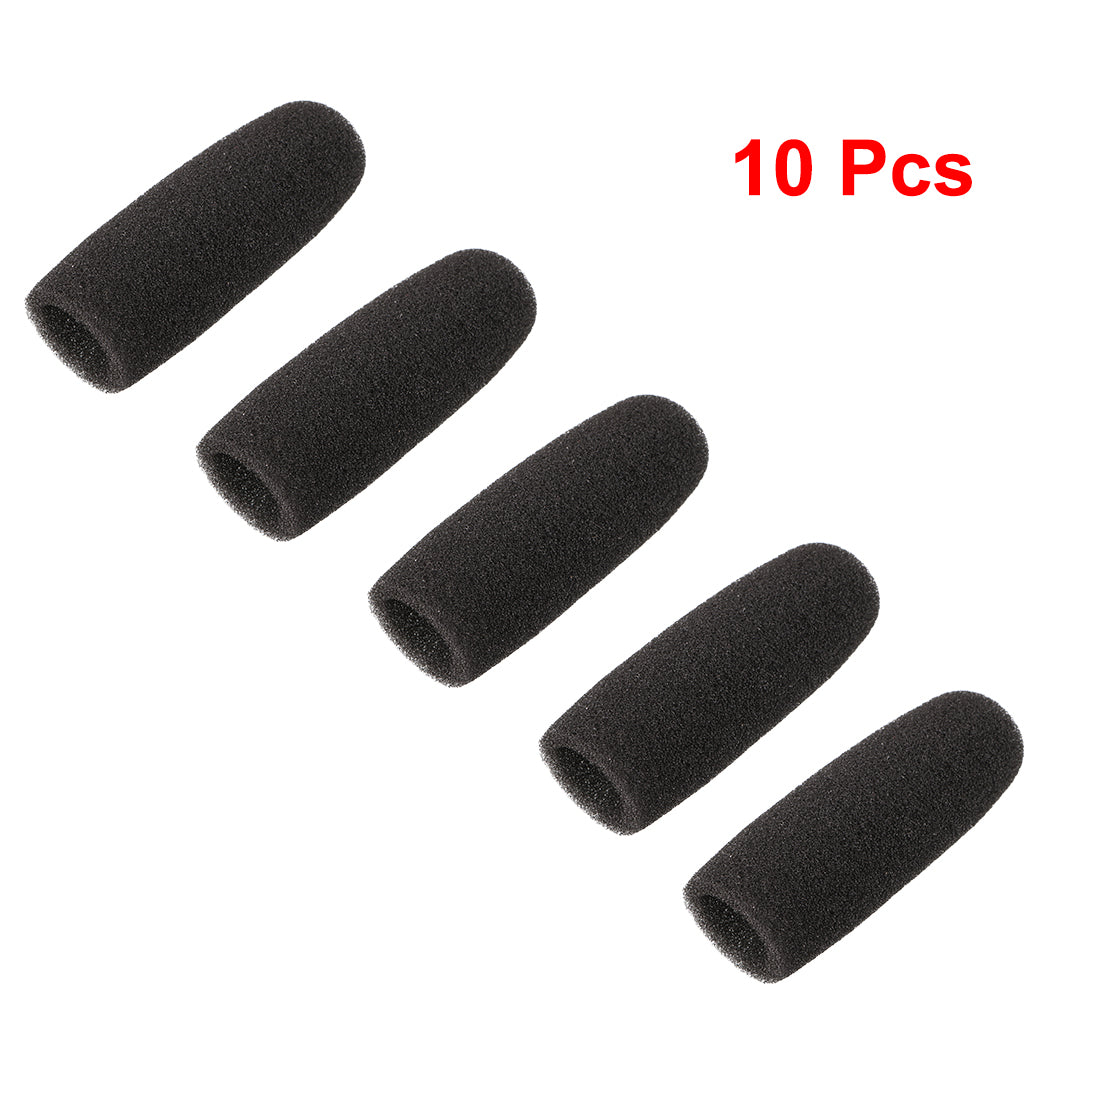 uxcell Uxcell 10PCS Sponge Foam Mic Cover Conference Microphone Windscreen Shield Protection Black 72mm Long